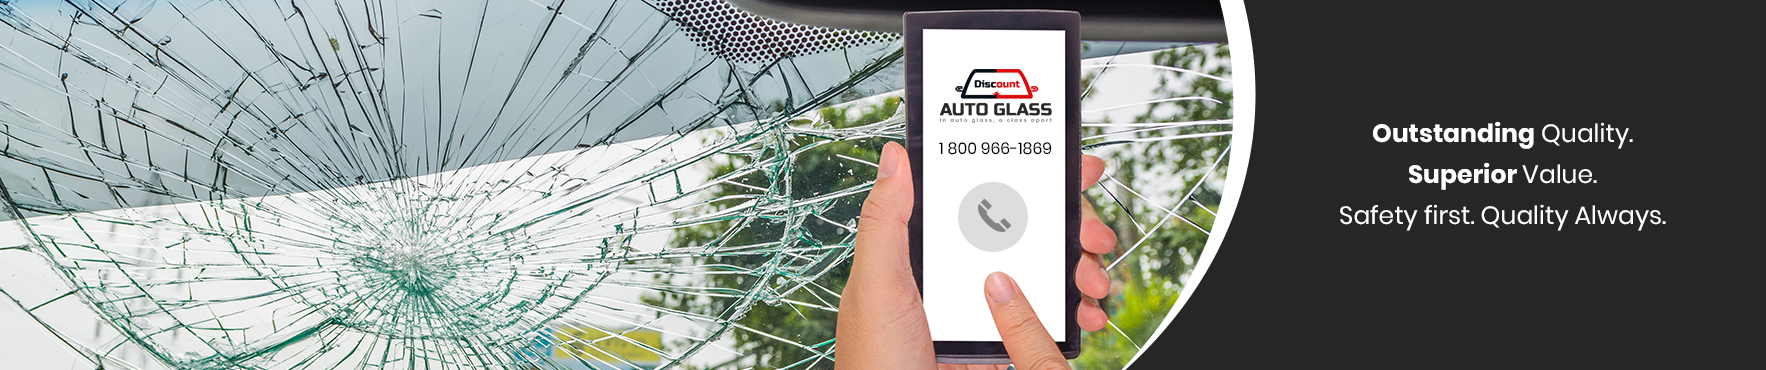 Auto Glass Insurance Claims